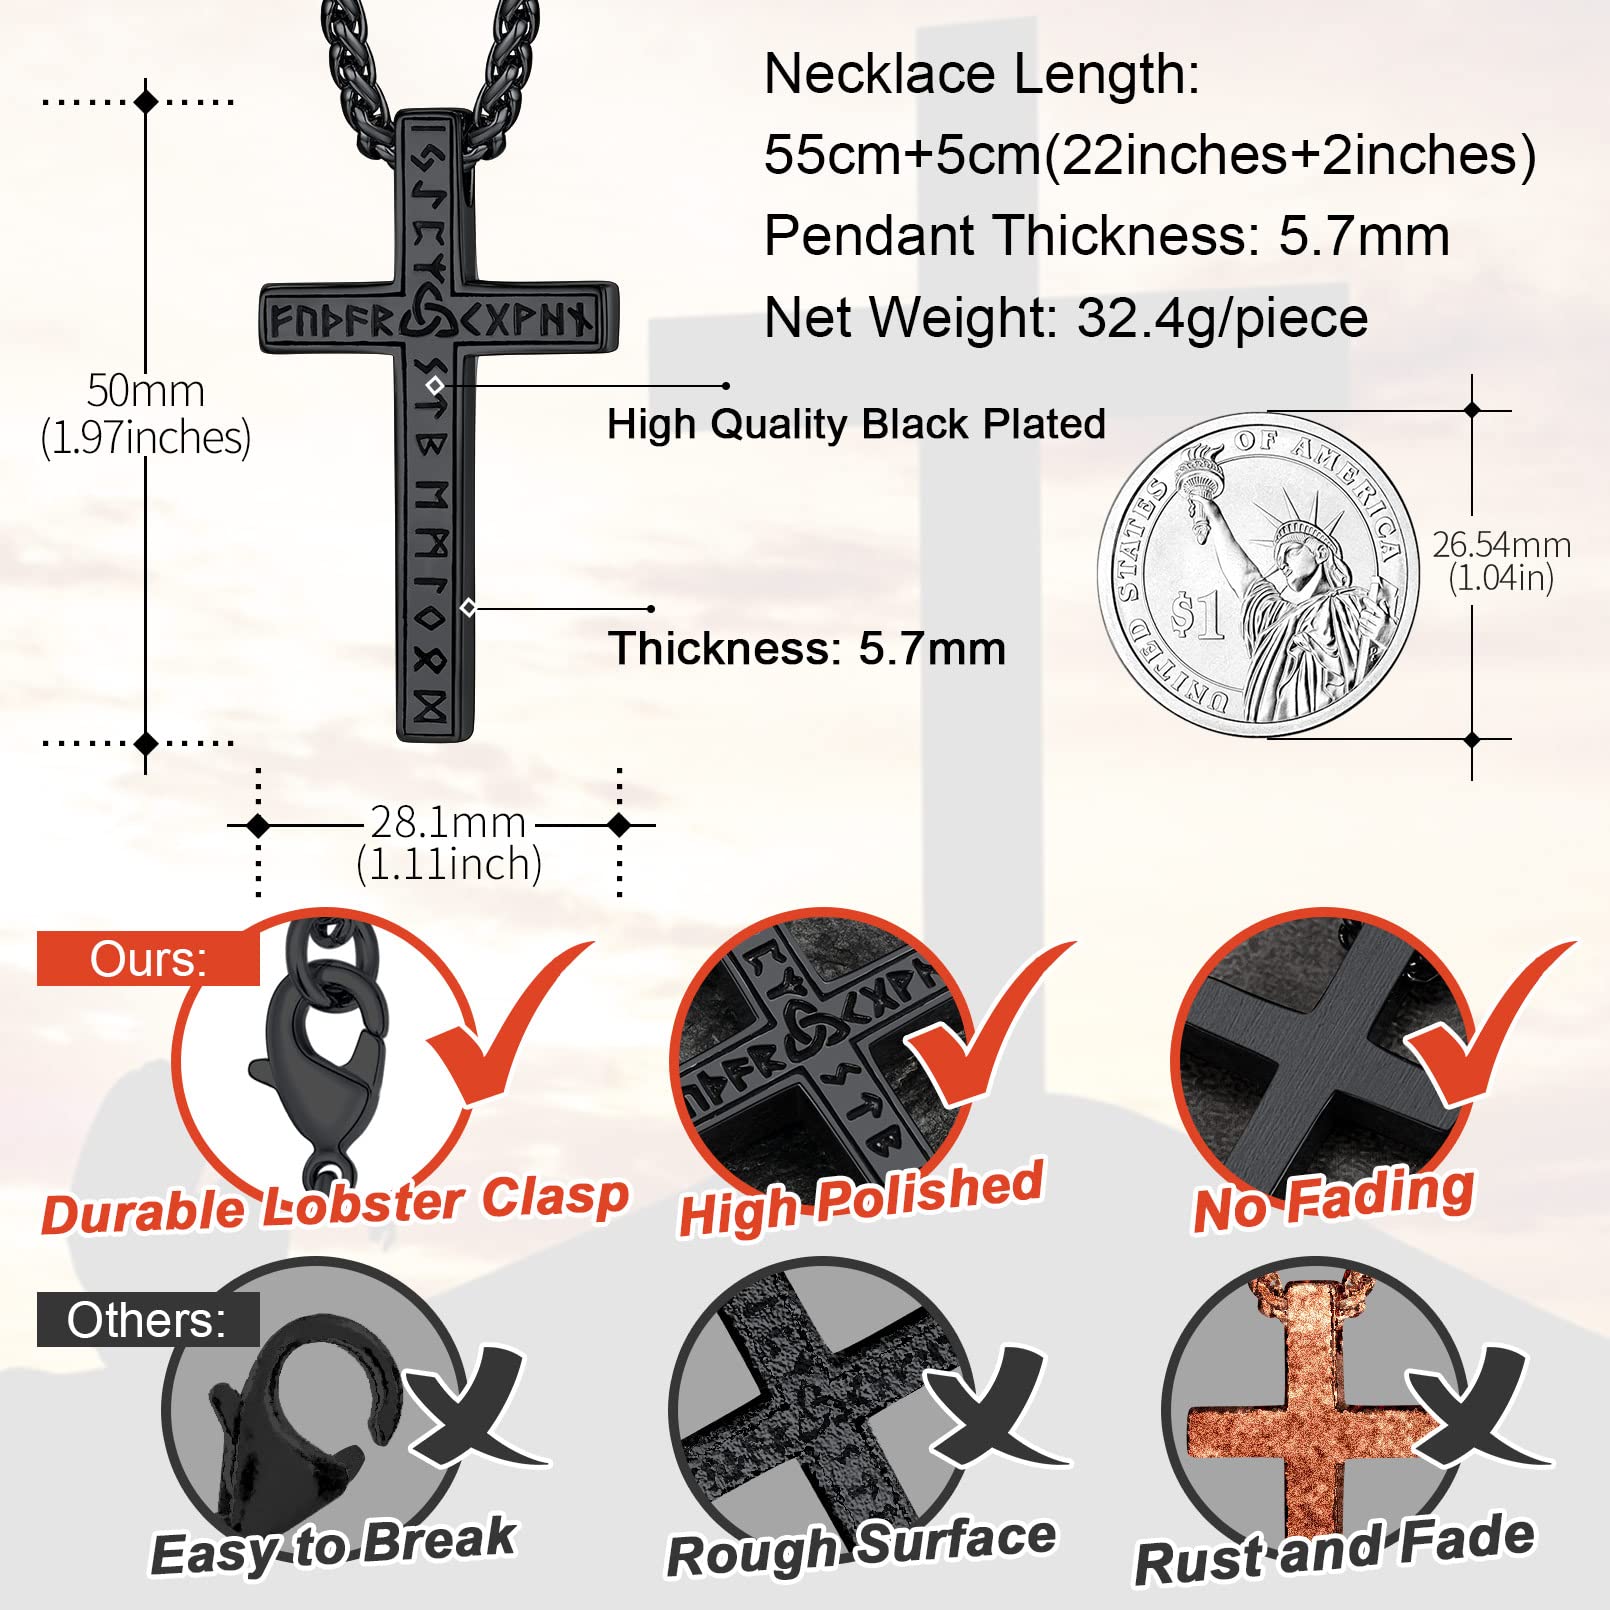 FaithHeart Cross Necklace for Men, Christian Crucifix Protection Amulet Pendant Necklace Stainless Steel Jewelry for Women